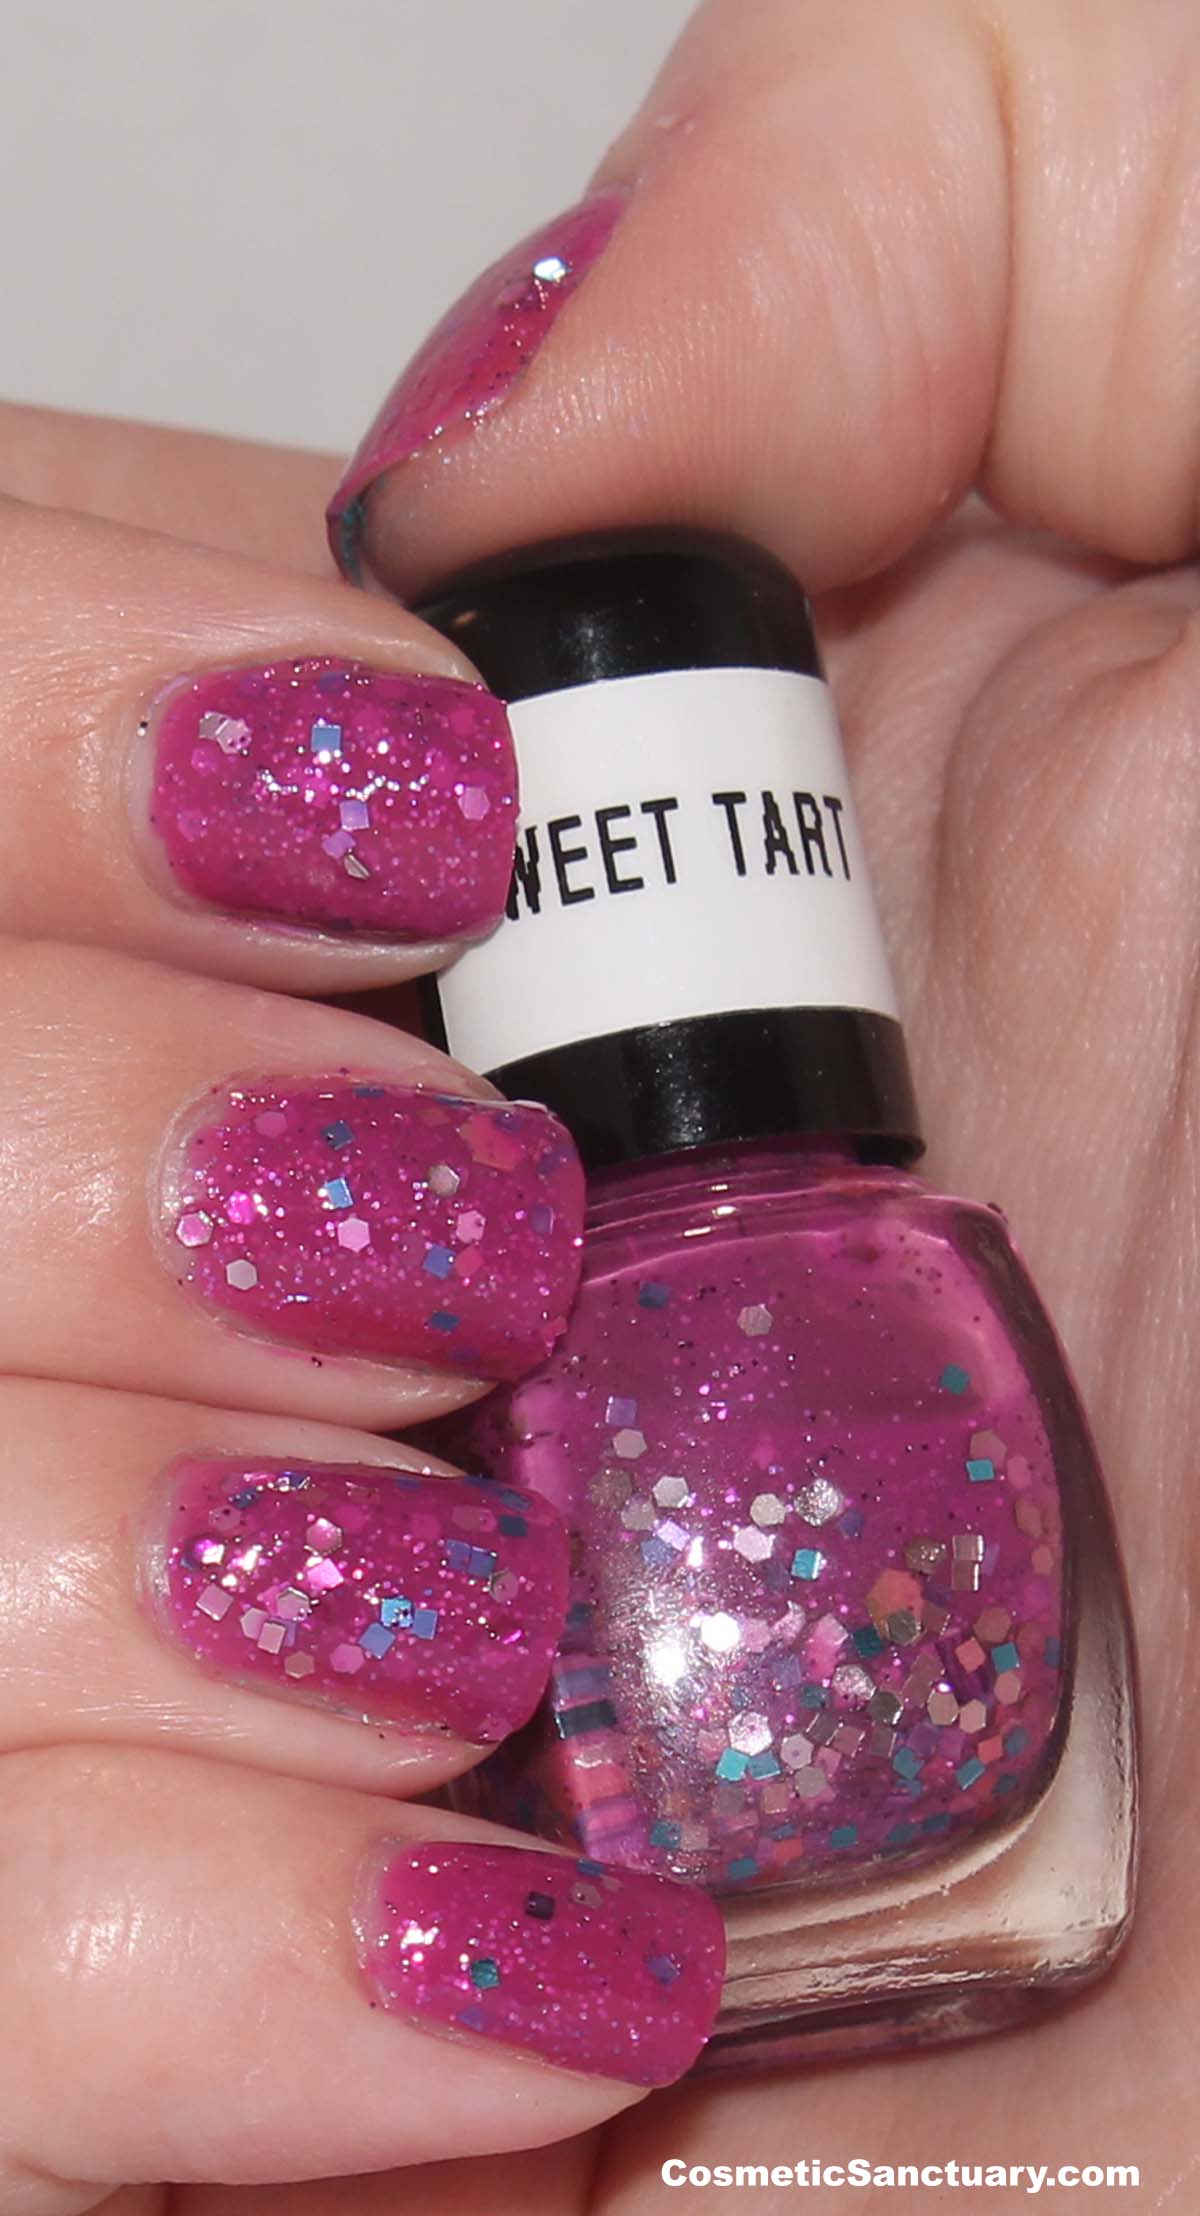 Sweet Tart is a lovely pink jelly base that is packed with Gold hexagonal